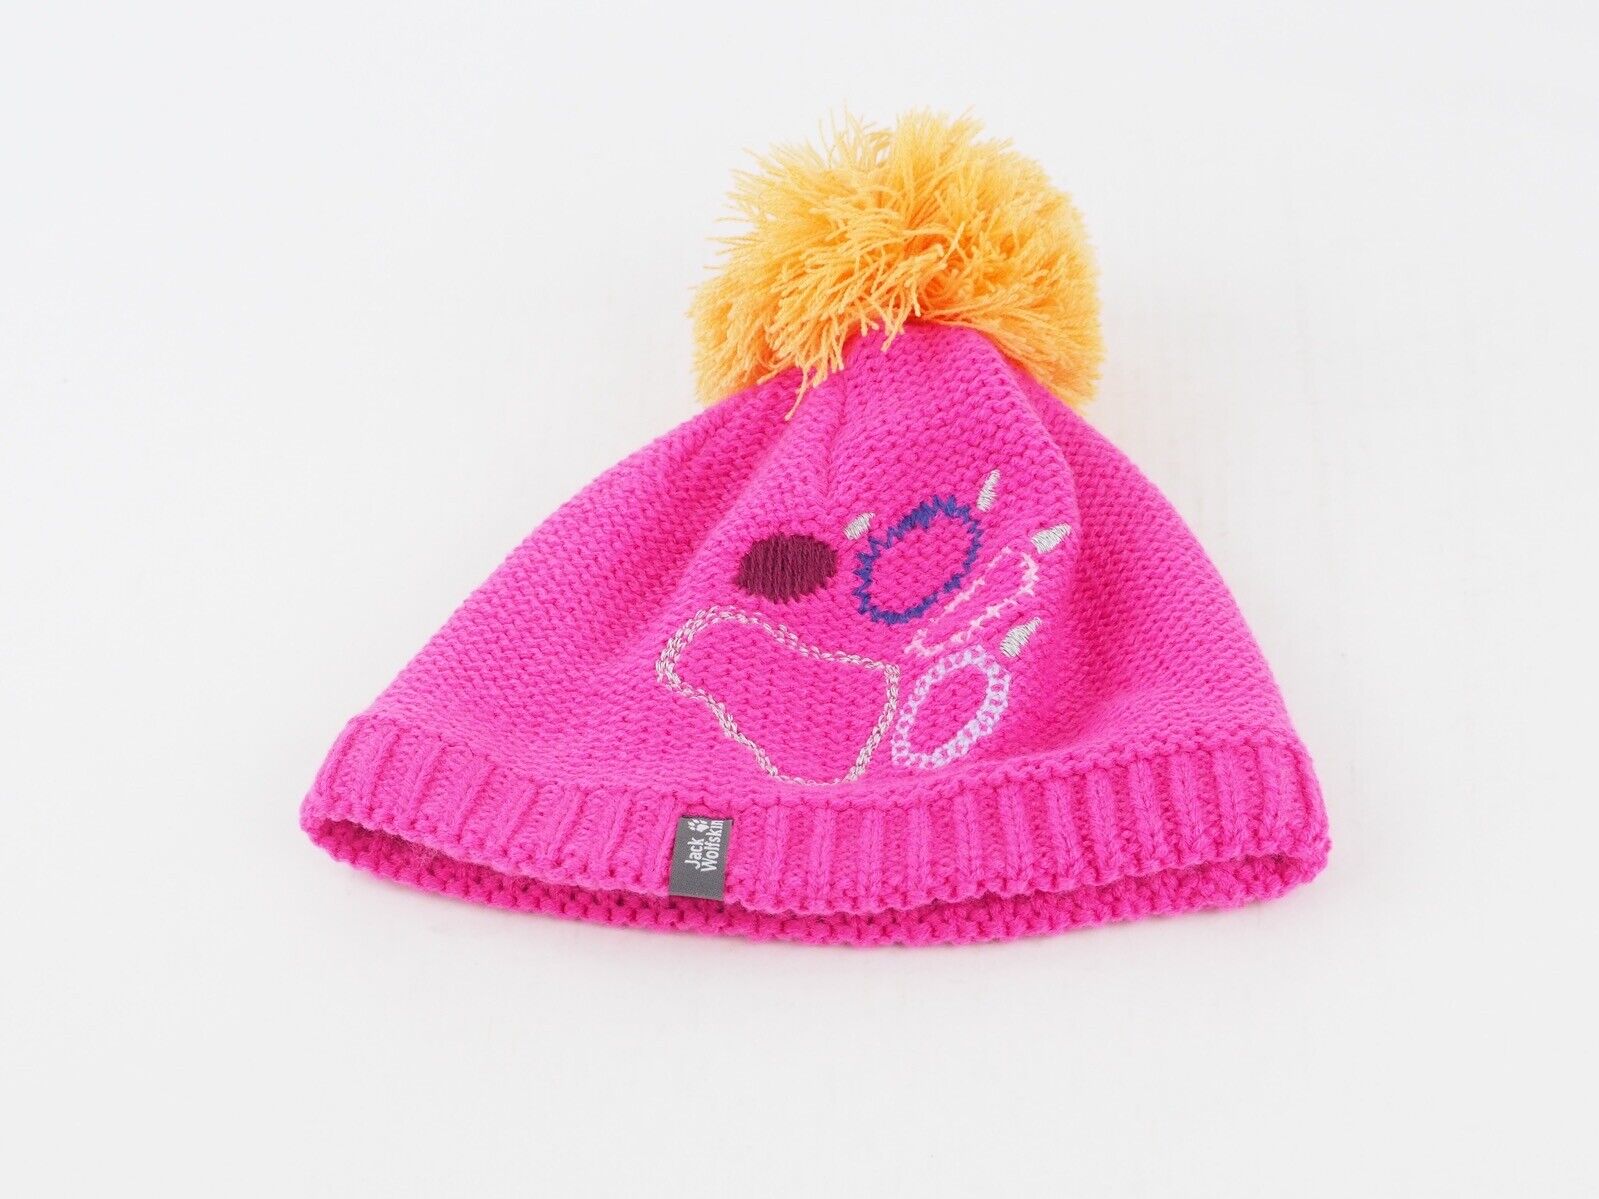 Girls Jack Wolfskin Paw Print Pink A Cap Warm London Knit Pom Winter Top Hat With – Style